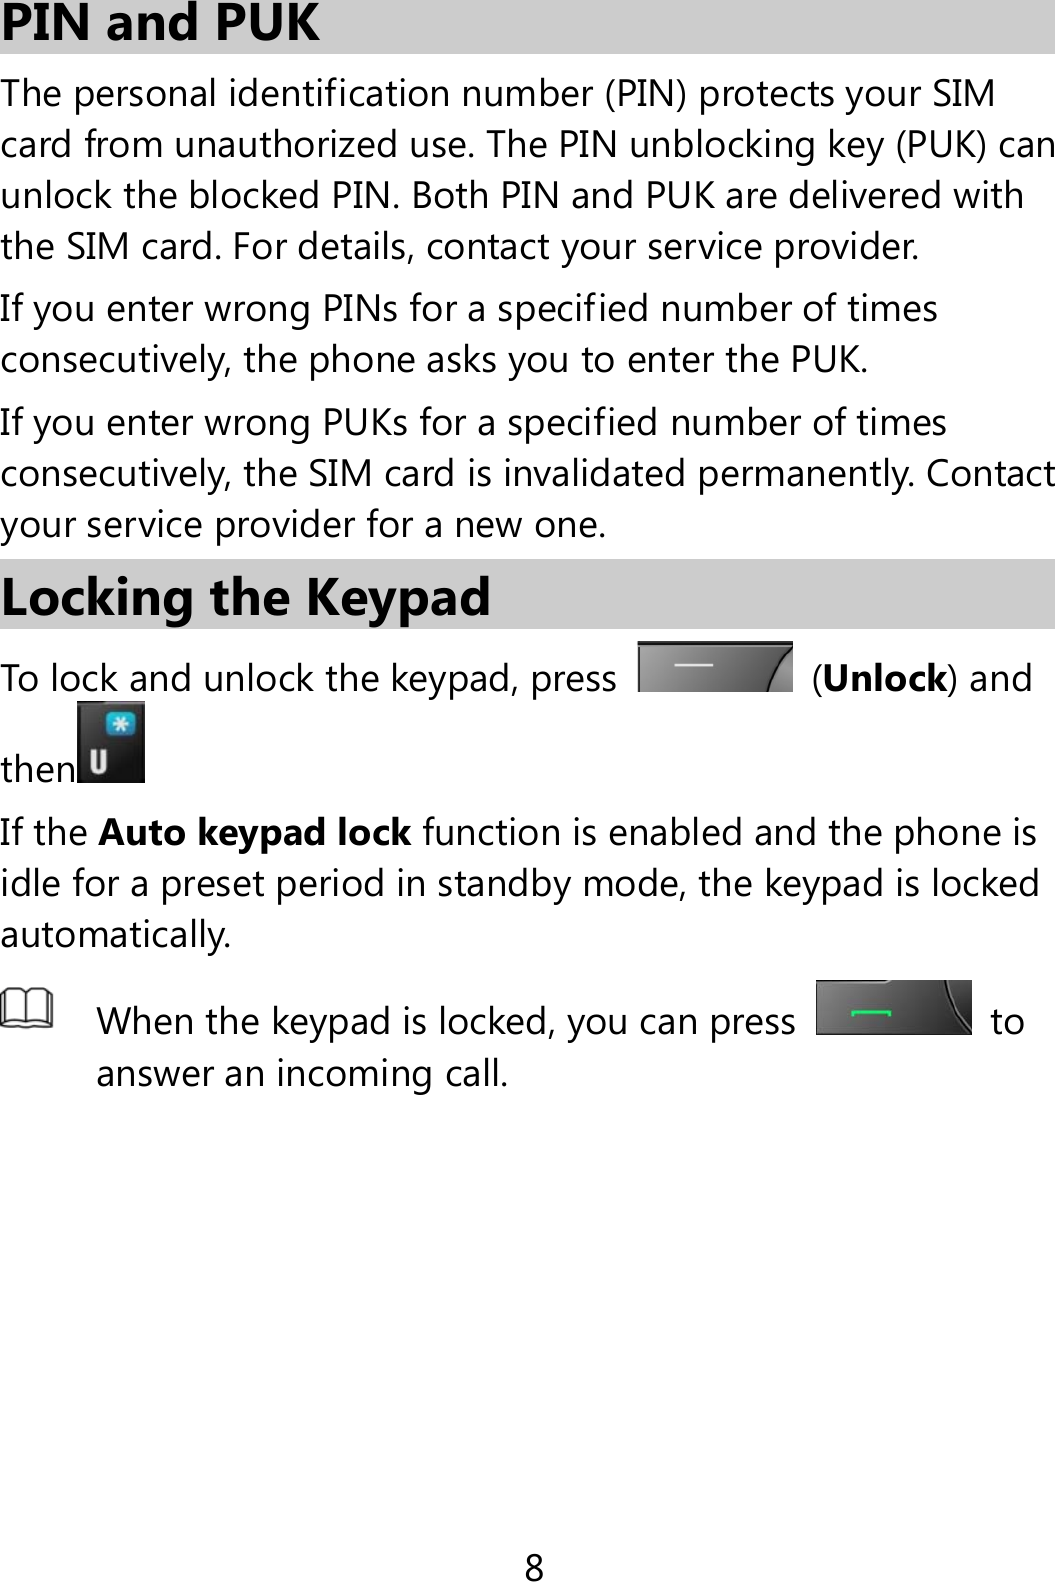 8 PIN and PUK   The personal identification number (PIN) protects your SIM card from unauthorized use. The PIN unblocking key (PUK) can unlock the blocked PIN. Both PIN and PUK are delivered with the SIM card. For details, contact your service provider. If you enter wrong PINs for a specified number of times consecutively, the phone asks you to enter the PUK. If you enter wrong PUKs for a specified number of times consecutively, the SIM card is invalidated permanently. Contact your service provider for a new one. Locking the Keypad To lock and unlock the keypad, press  (Unlock) and then  If the Auto keypad lock function is enabled and the phone is idle for a preset period in standby mode, the keypad is locked automatically.  When the keypad is locked, you can press  to answer an incoming call.  